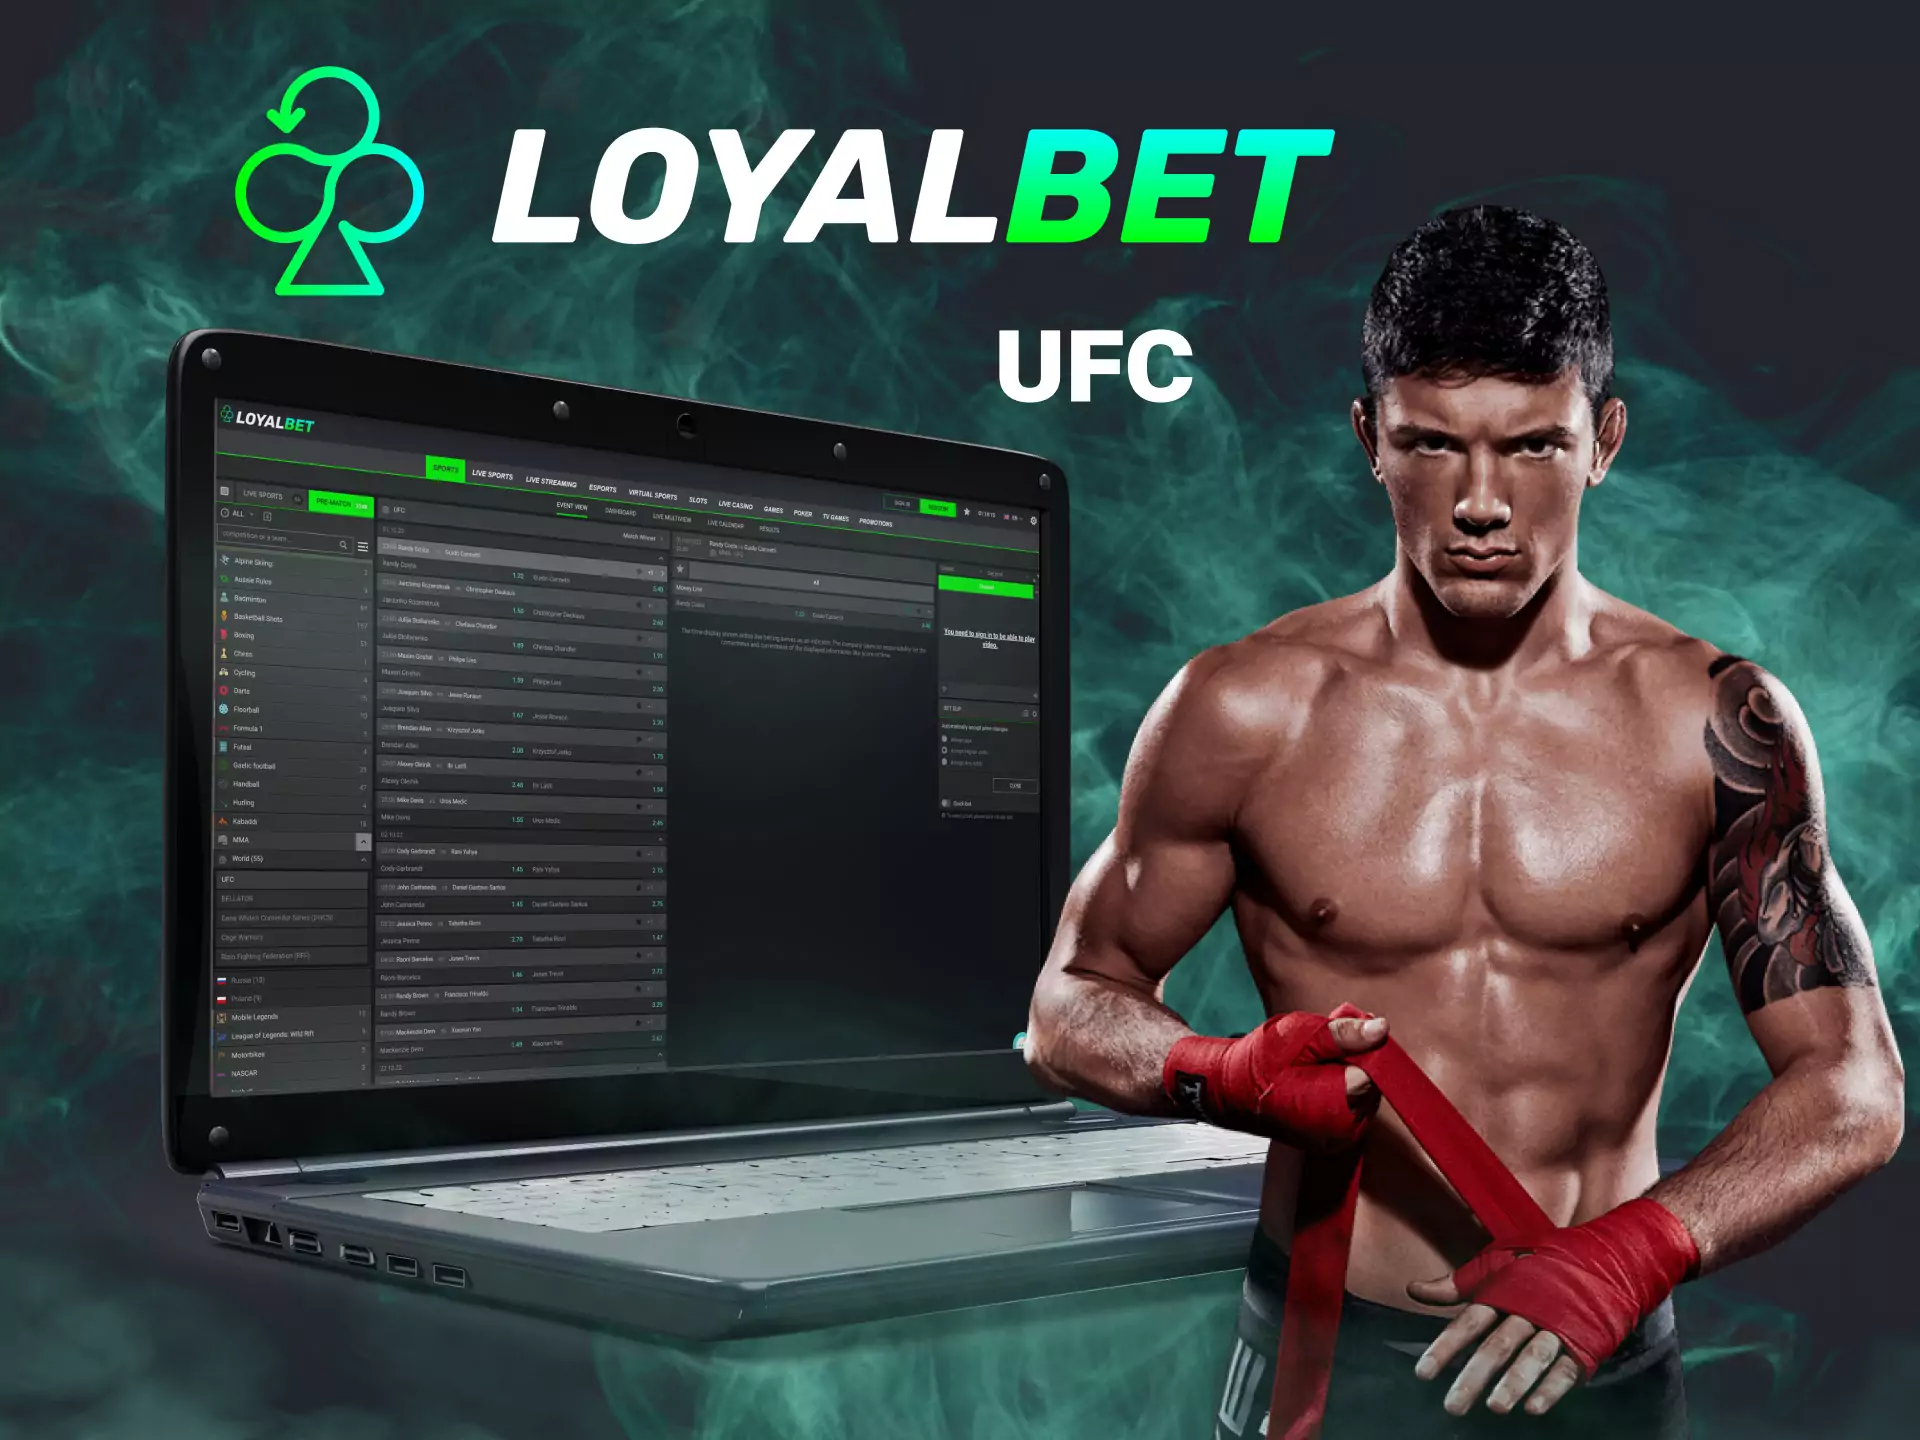 UFC fights are really popular among users of the Loyalbet website.